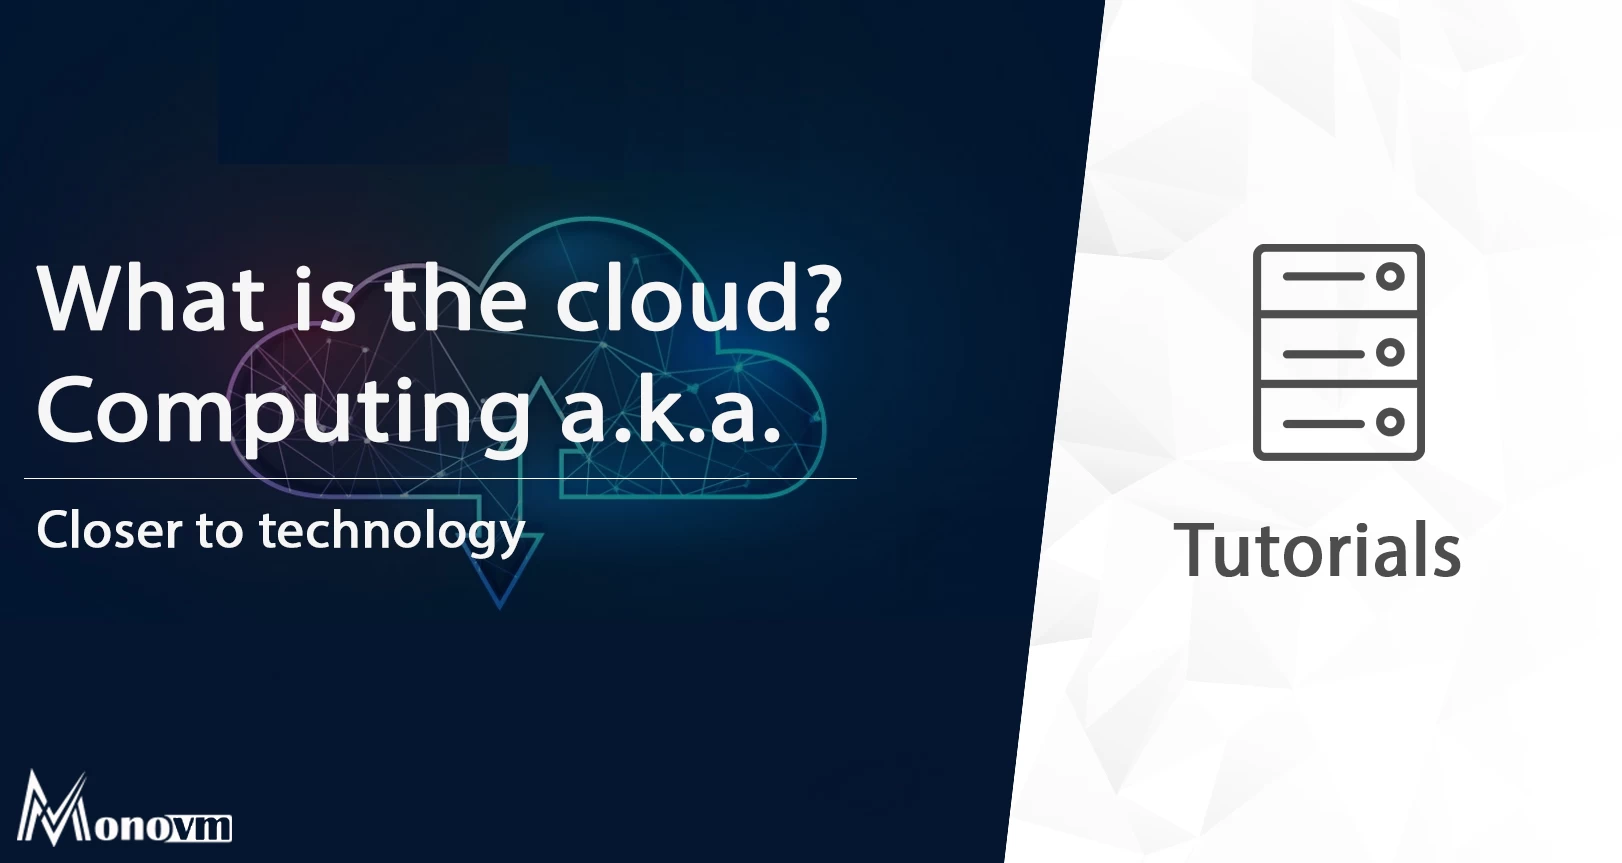 What is Cloud Computing a.k.a. "The Cloud"?